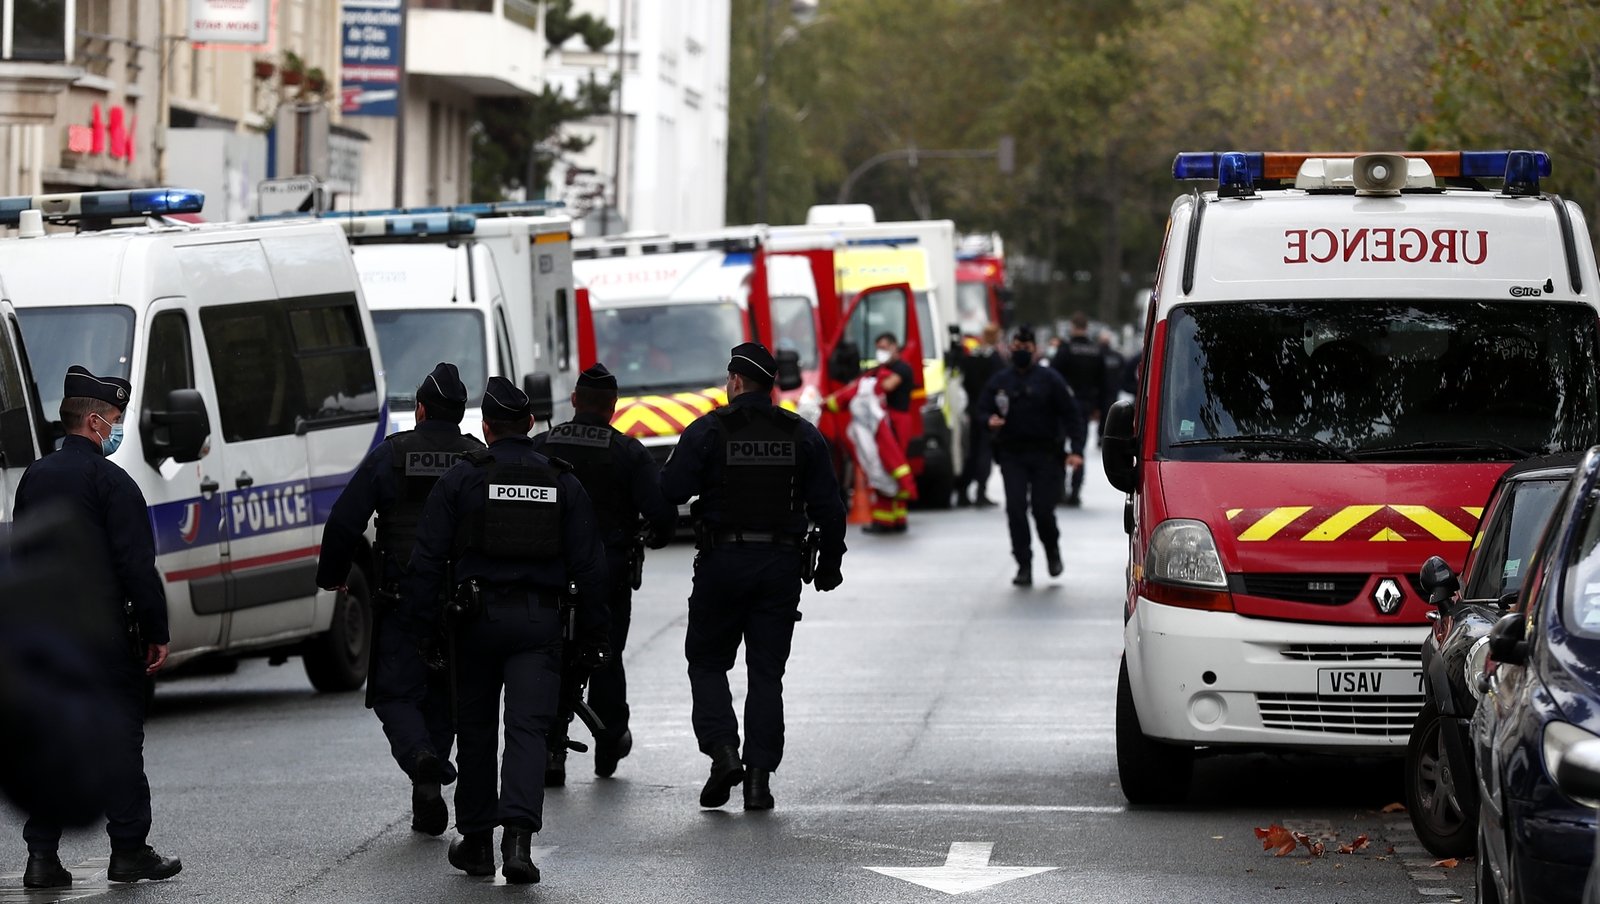 Two people have been arrested after a knife attack in Paris

